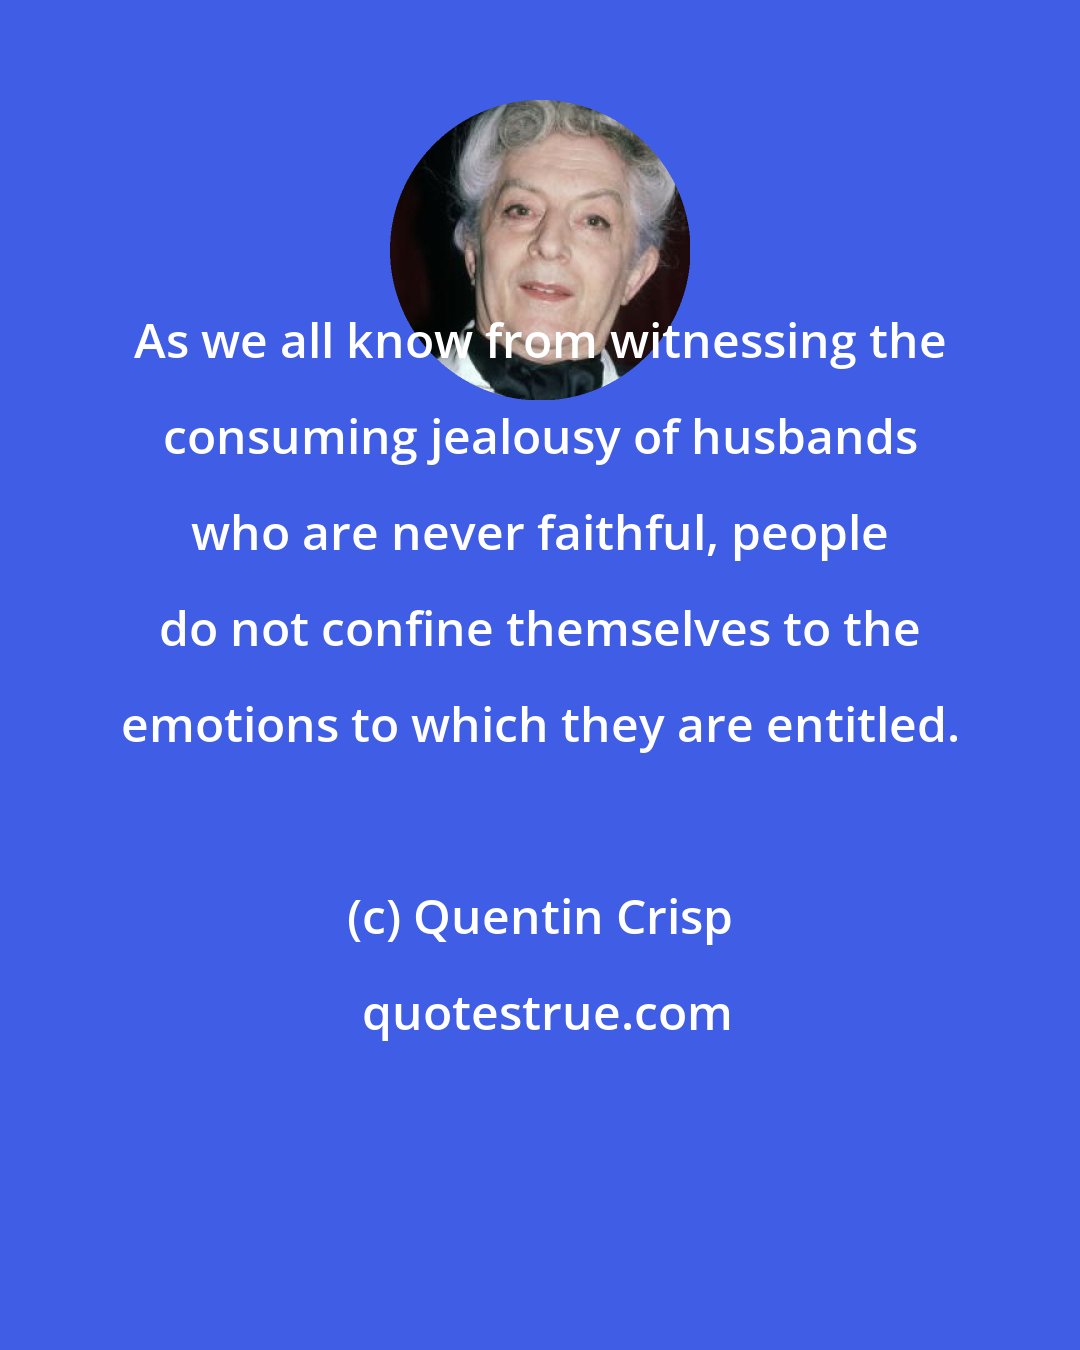 Quentin Crisp: As we all know from witnessing the consuming jealousy of husbands who are never faithful, people do not confine themselves to the emotions to which they are entitled.